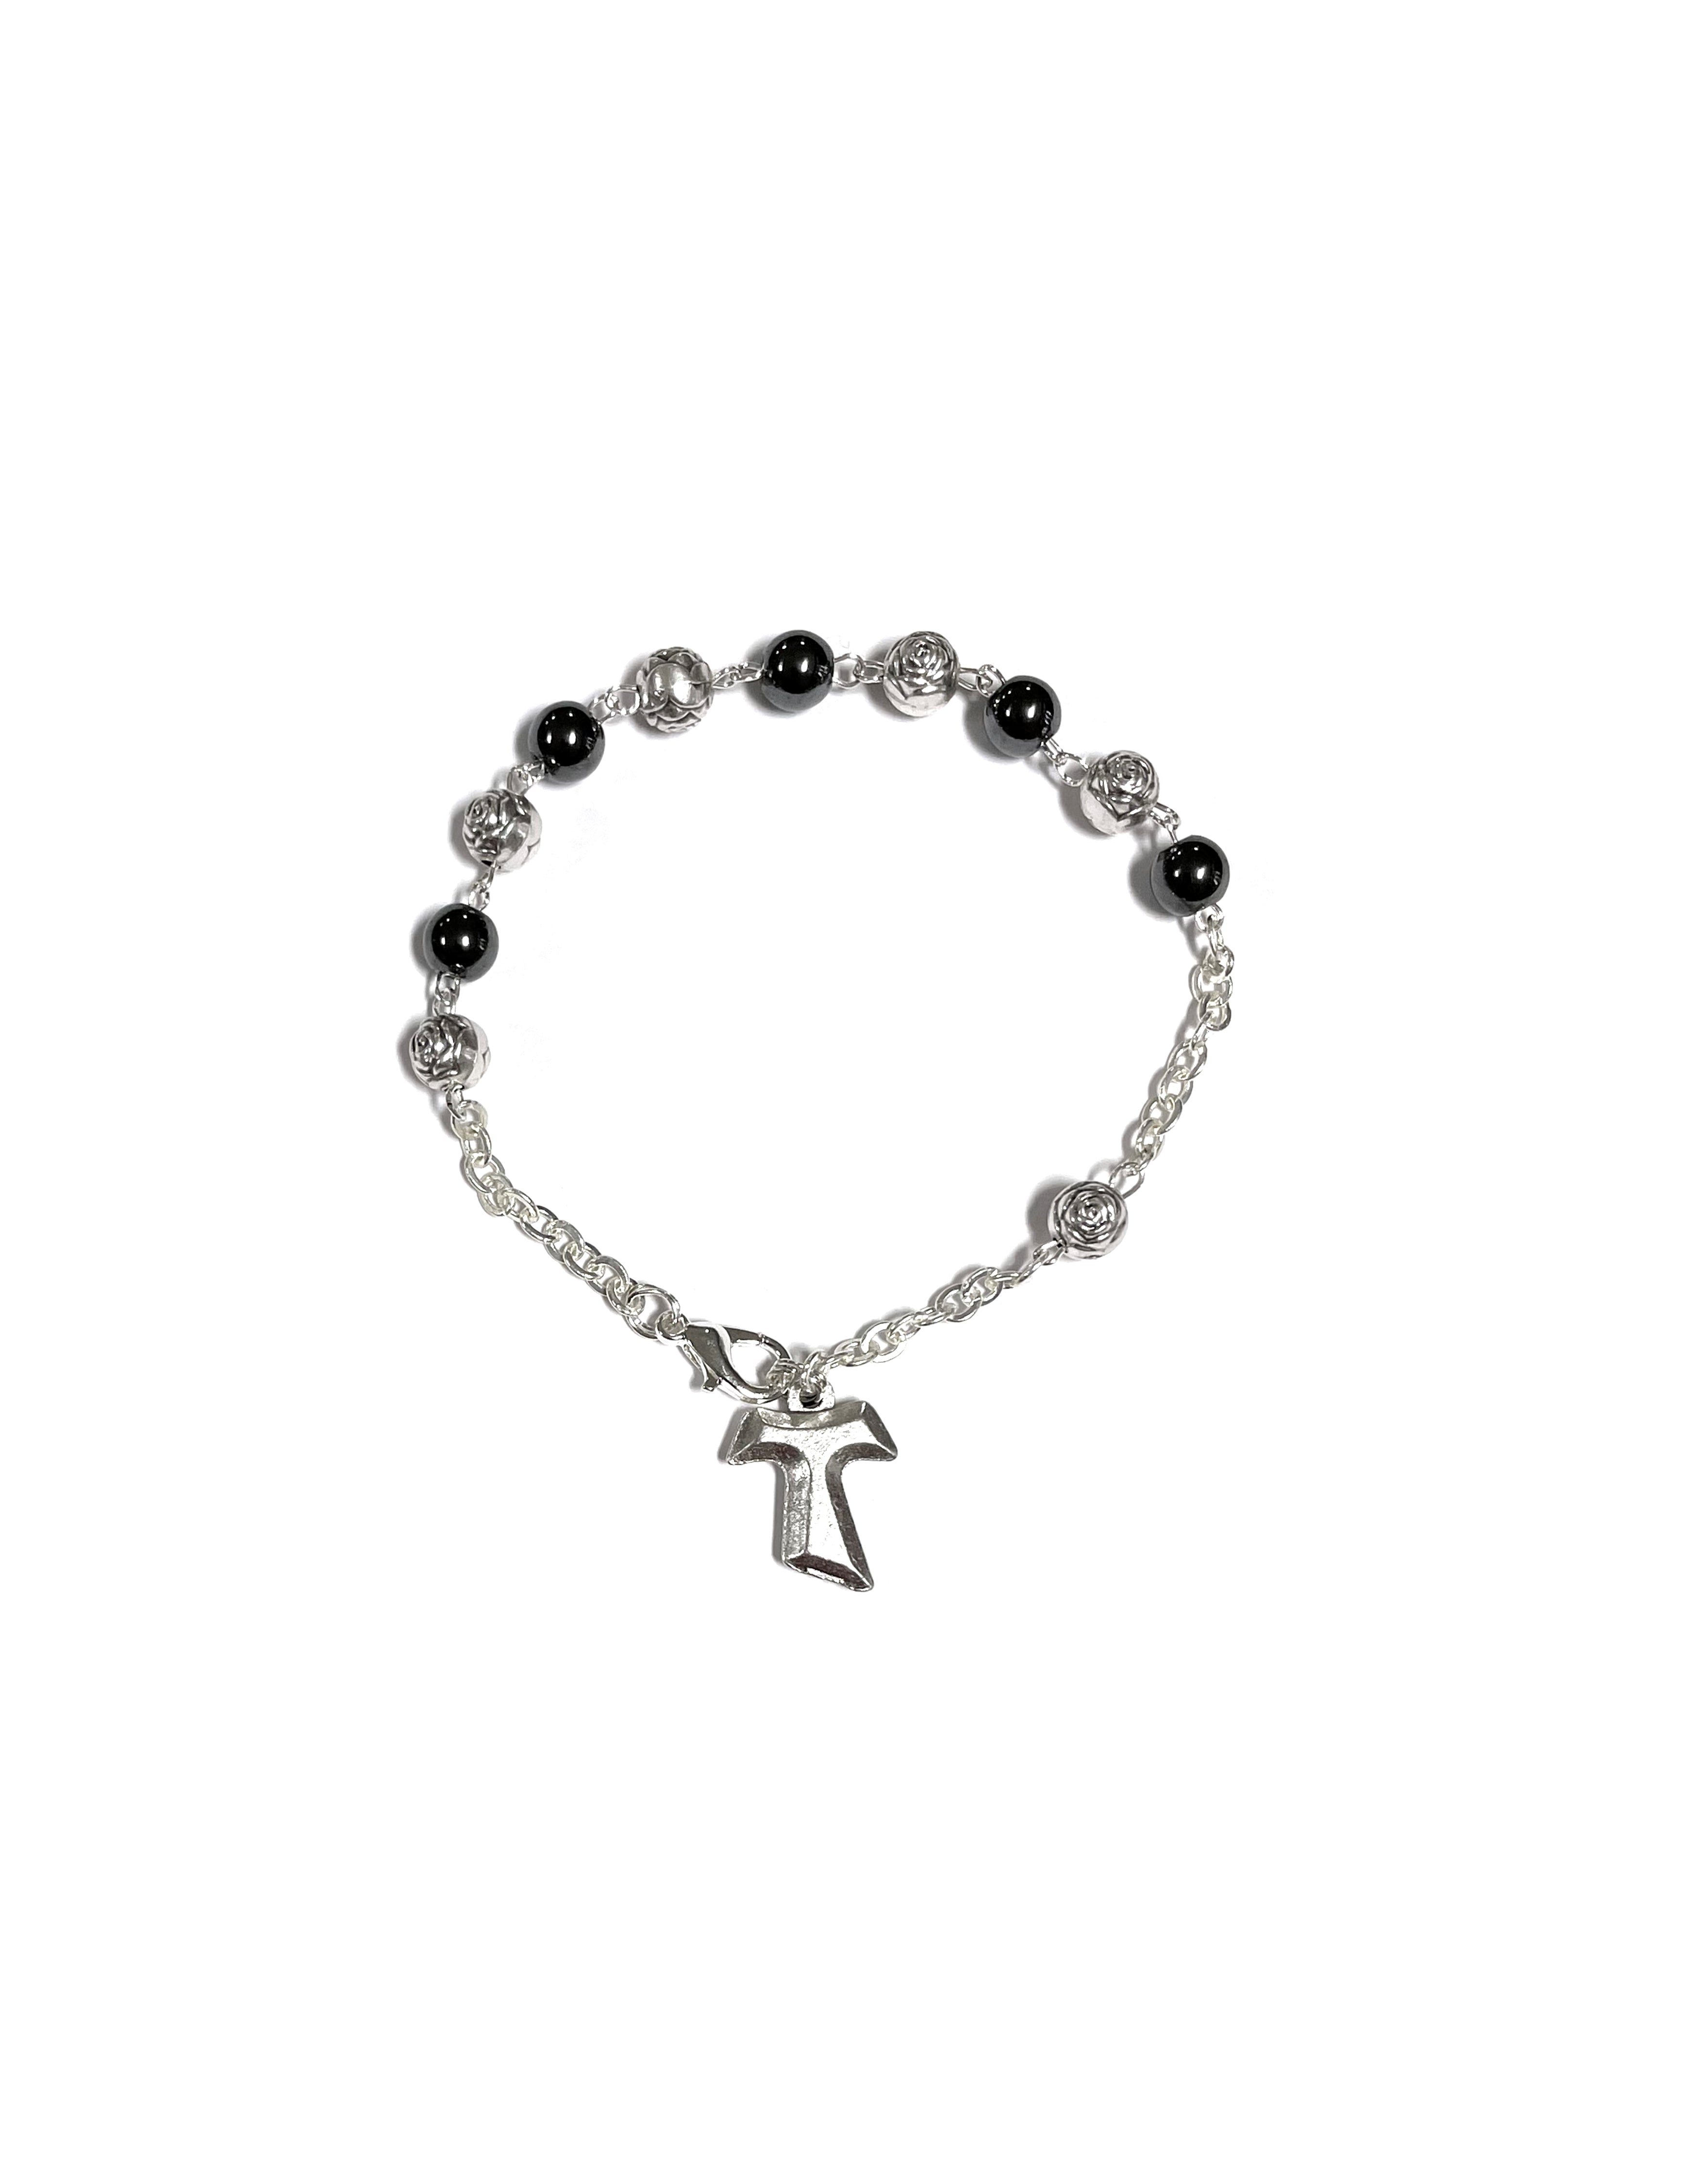 Oxidized silver Tau cross bracelet with hematite stone and rose-shaped beads